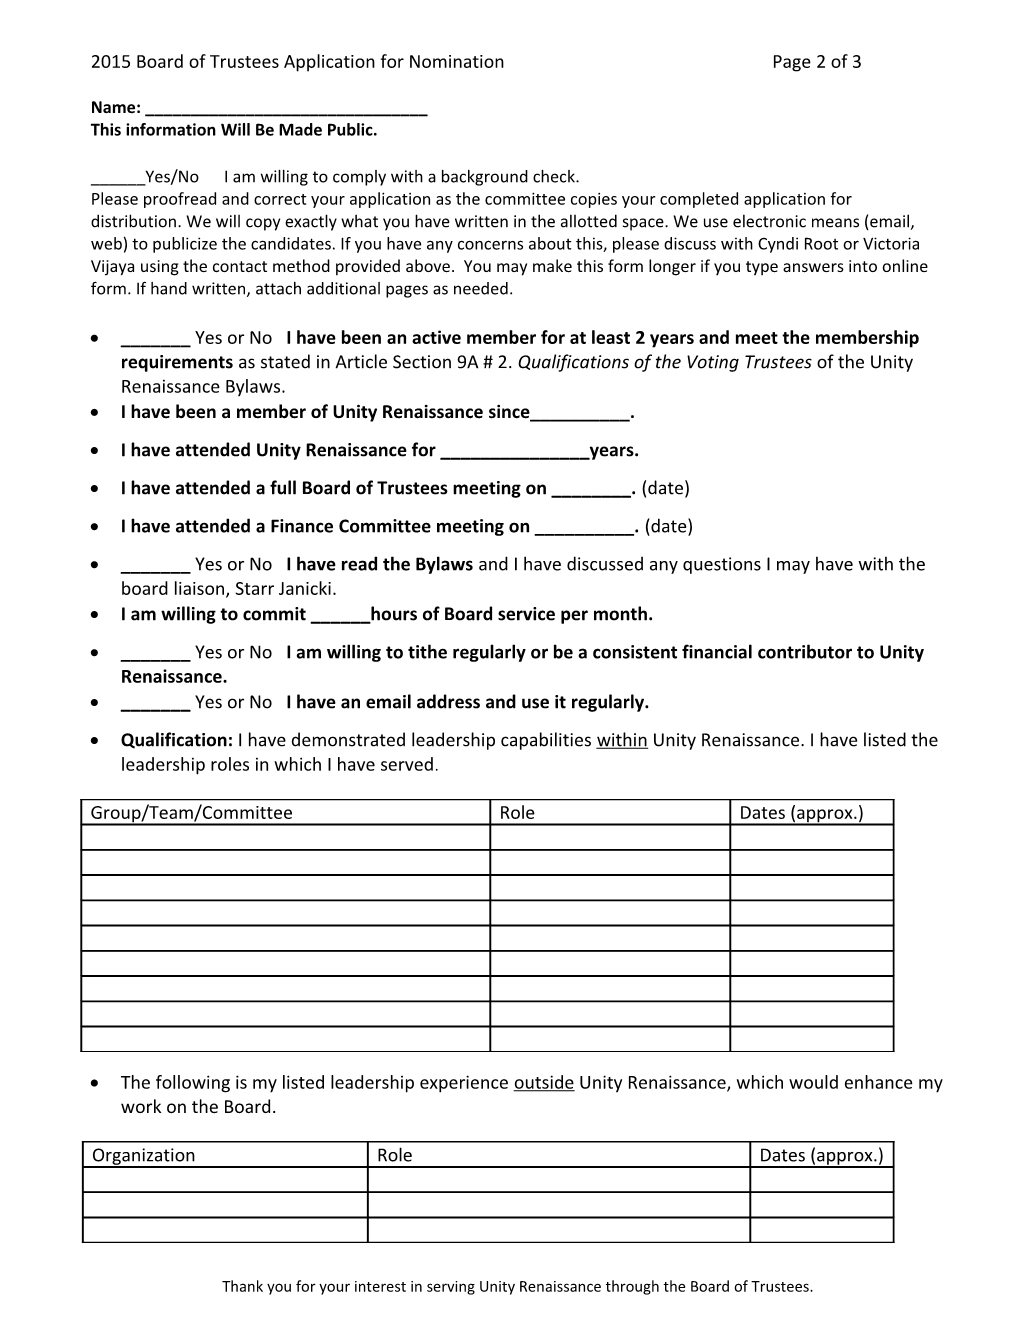 Application Packet for Board of Trustees Voting Member